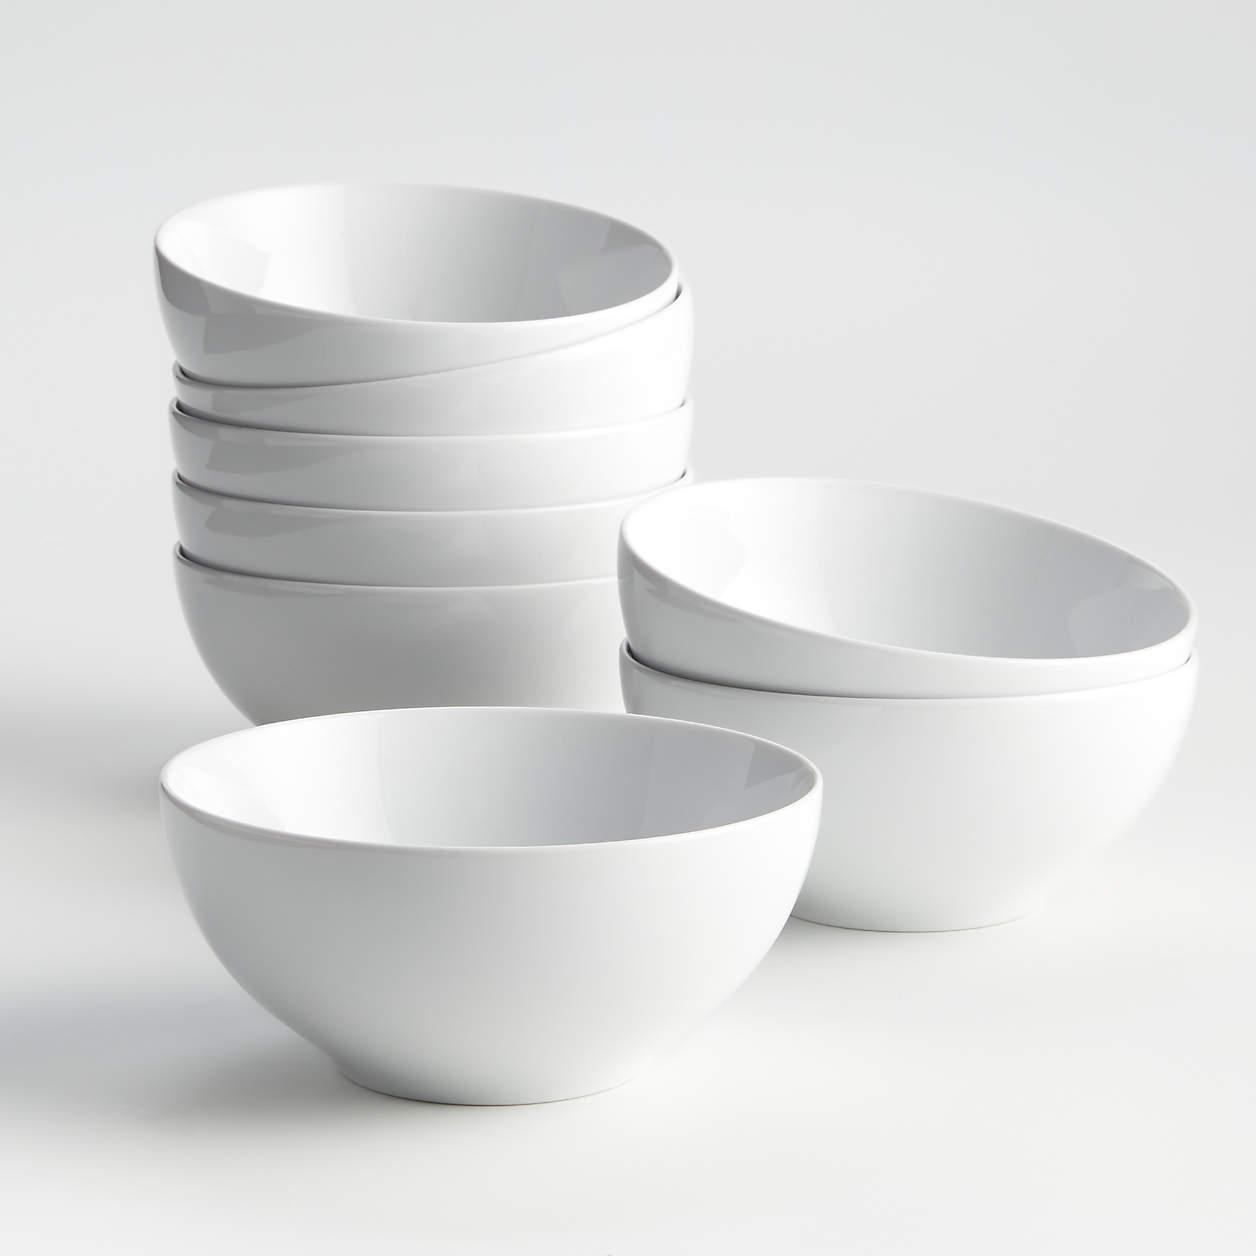 Crate and Barrel Aspen Dinnerware Bowls, generously sized bowls